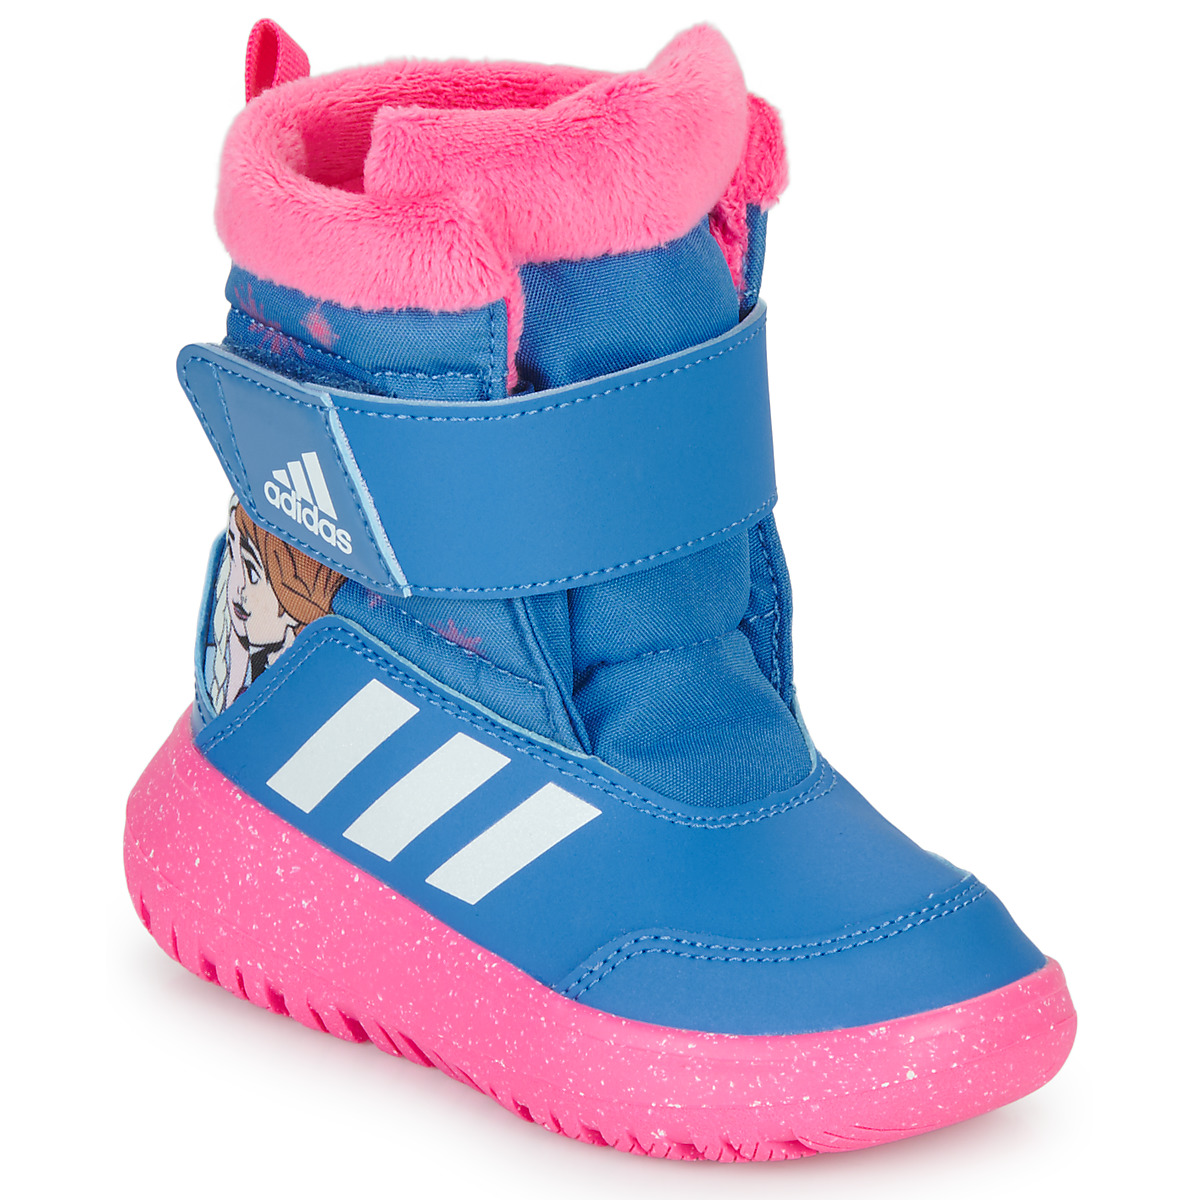 adidas Performance delivery Pink Free Shoes Child Blue | Spartoo boots - WINTERPLAY - ! / Snow I NET Frozen